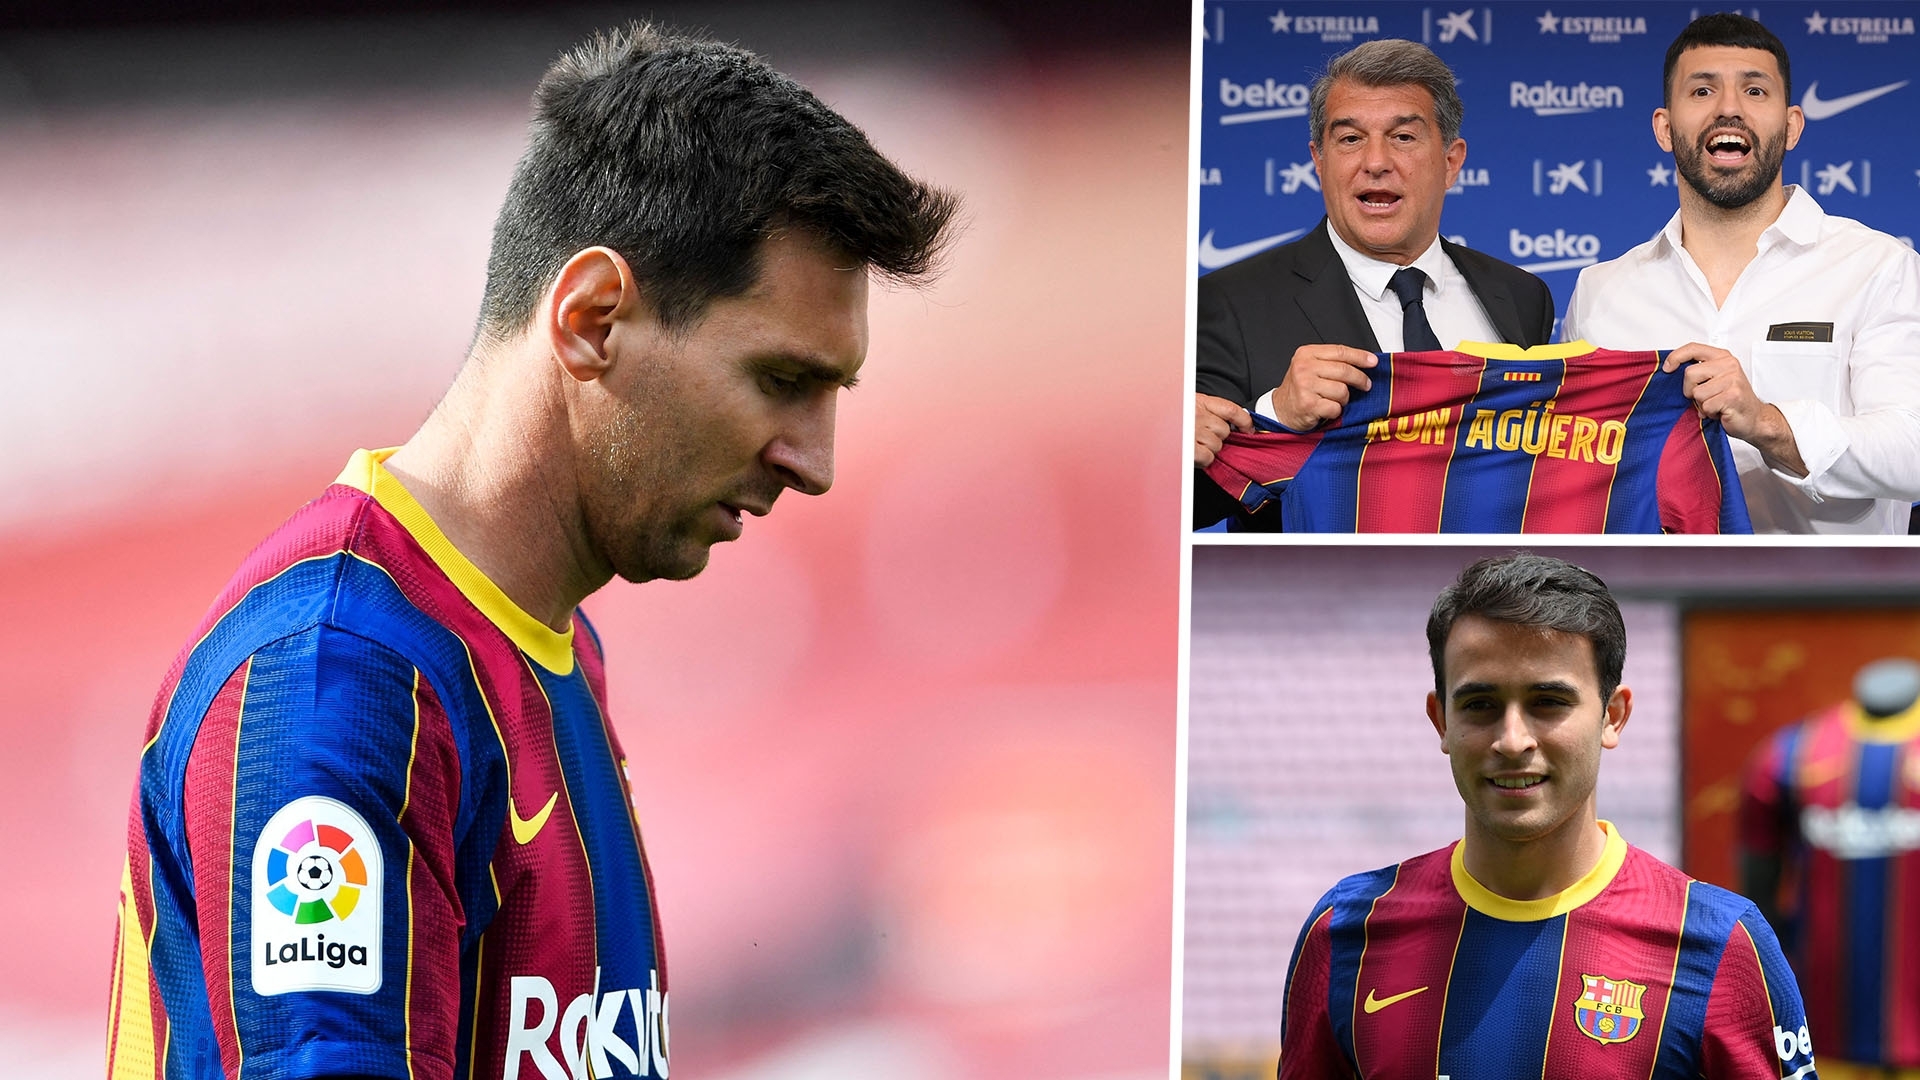 Joan Laporta Exclusive: Barcelona president on re-signing Messi, offering Ronaldo and avoiding defeats